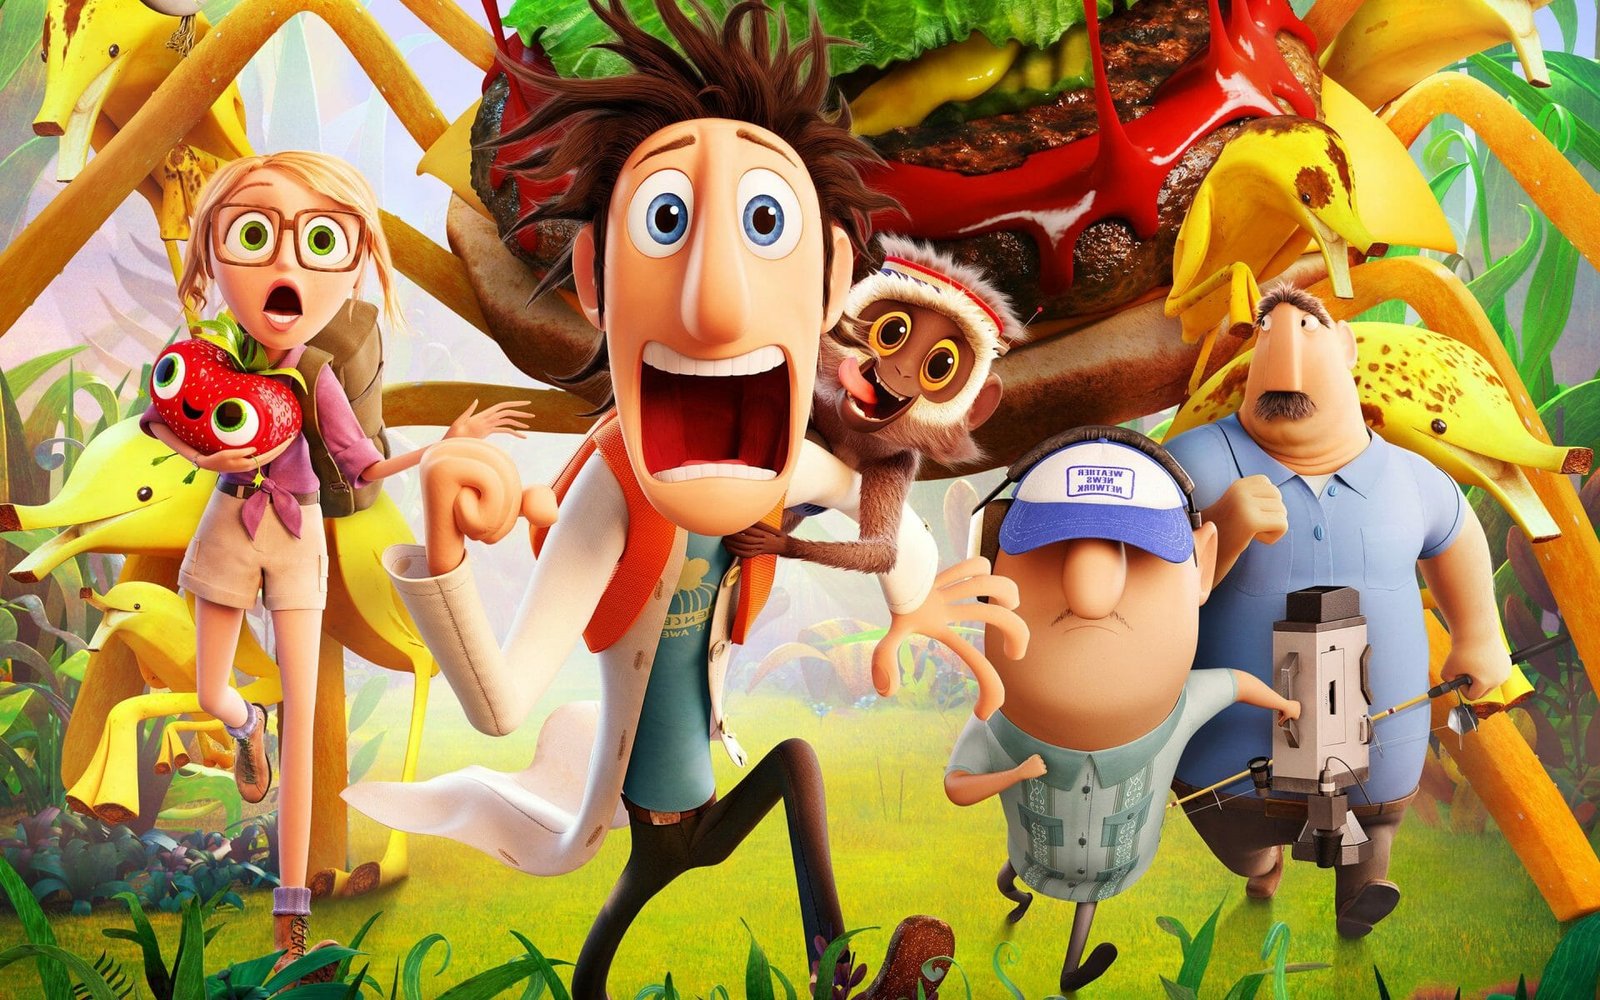 Netflix Animated Movies: Cloudy with a Chance of Meatballs